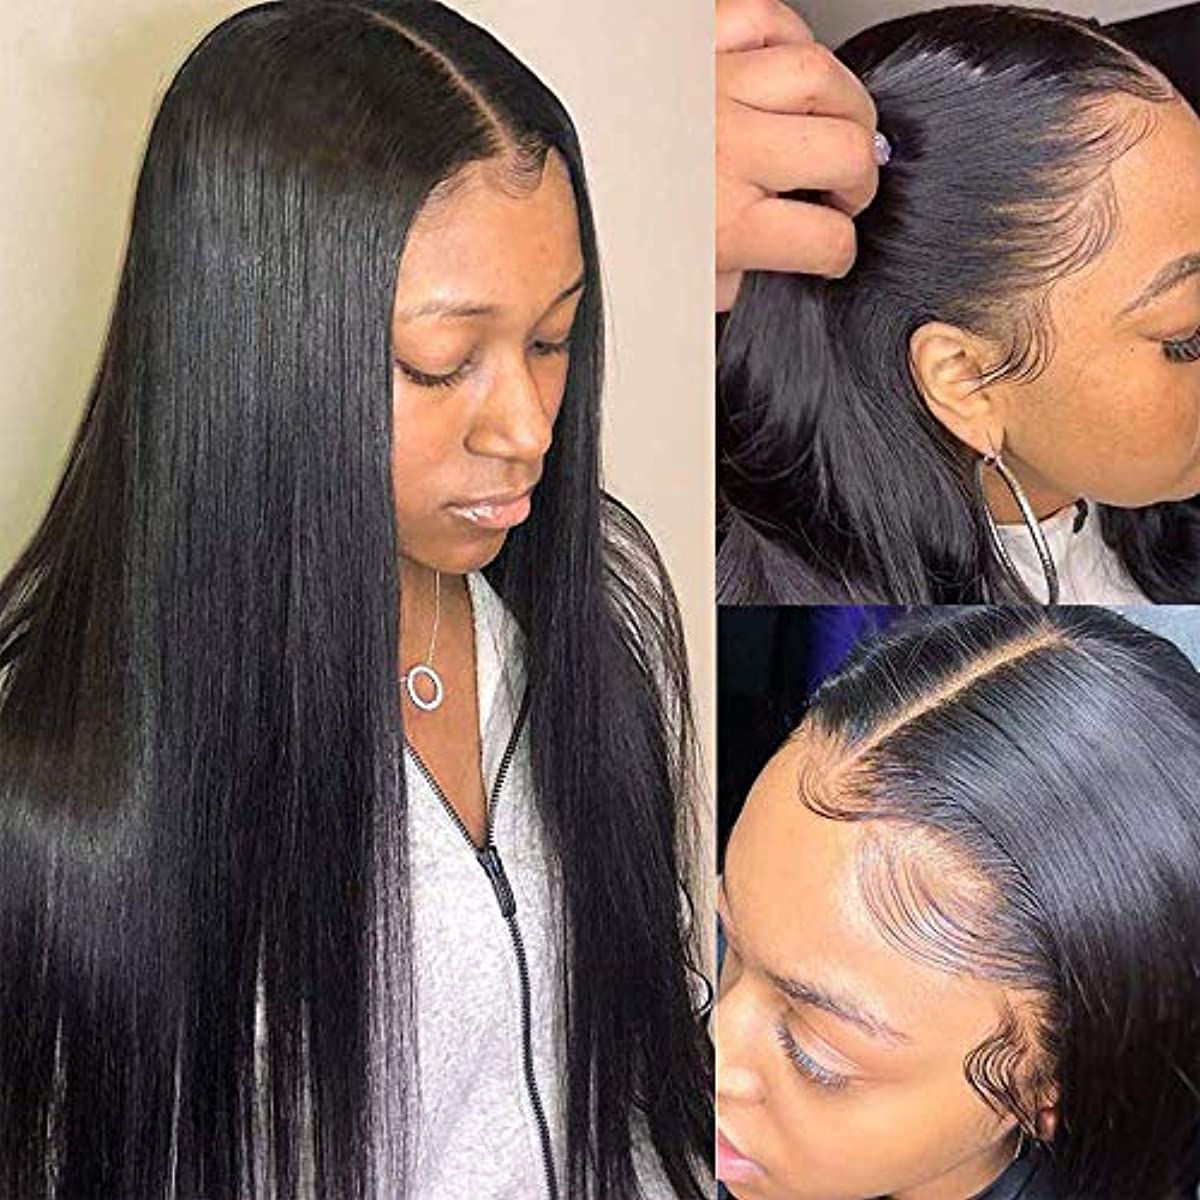 Lace Front Wigs Human Hair 24 inch Straight Lace Frontal Wigs For Black Woman 13x4 Lace Front Wigs Pre Plucked Hairline with Baby Hair 150{3ce9dc9f7e831427937bcc05bd5c36e3157a214b7a1ec5c234e105ad24840a77} Density 10A Dyale Natural Black Hair Wig(24 inch)